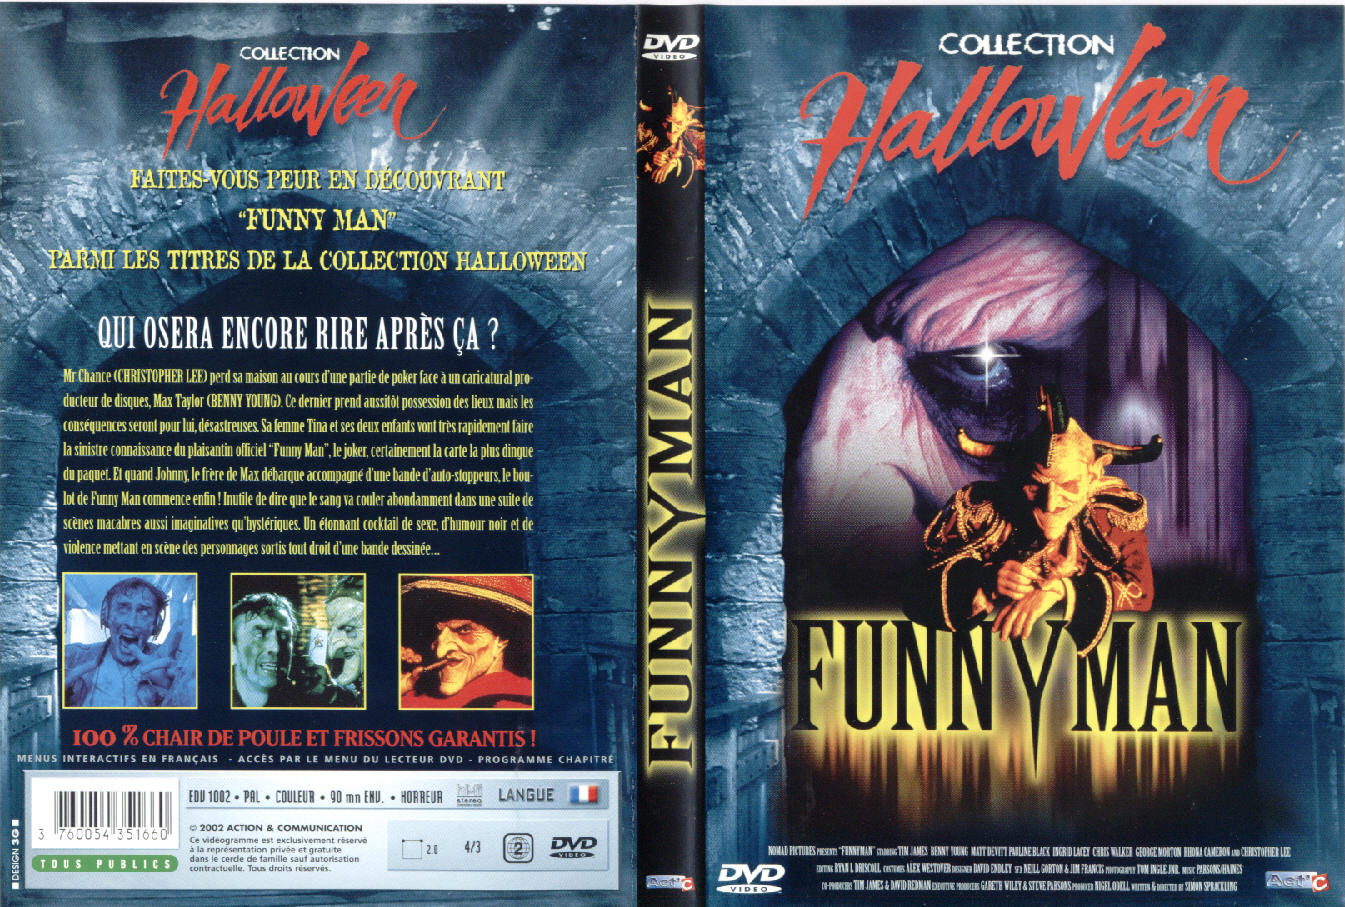 Jaquette DVD Funnyman